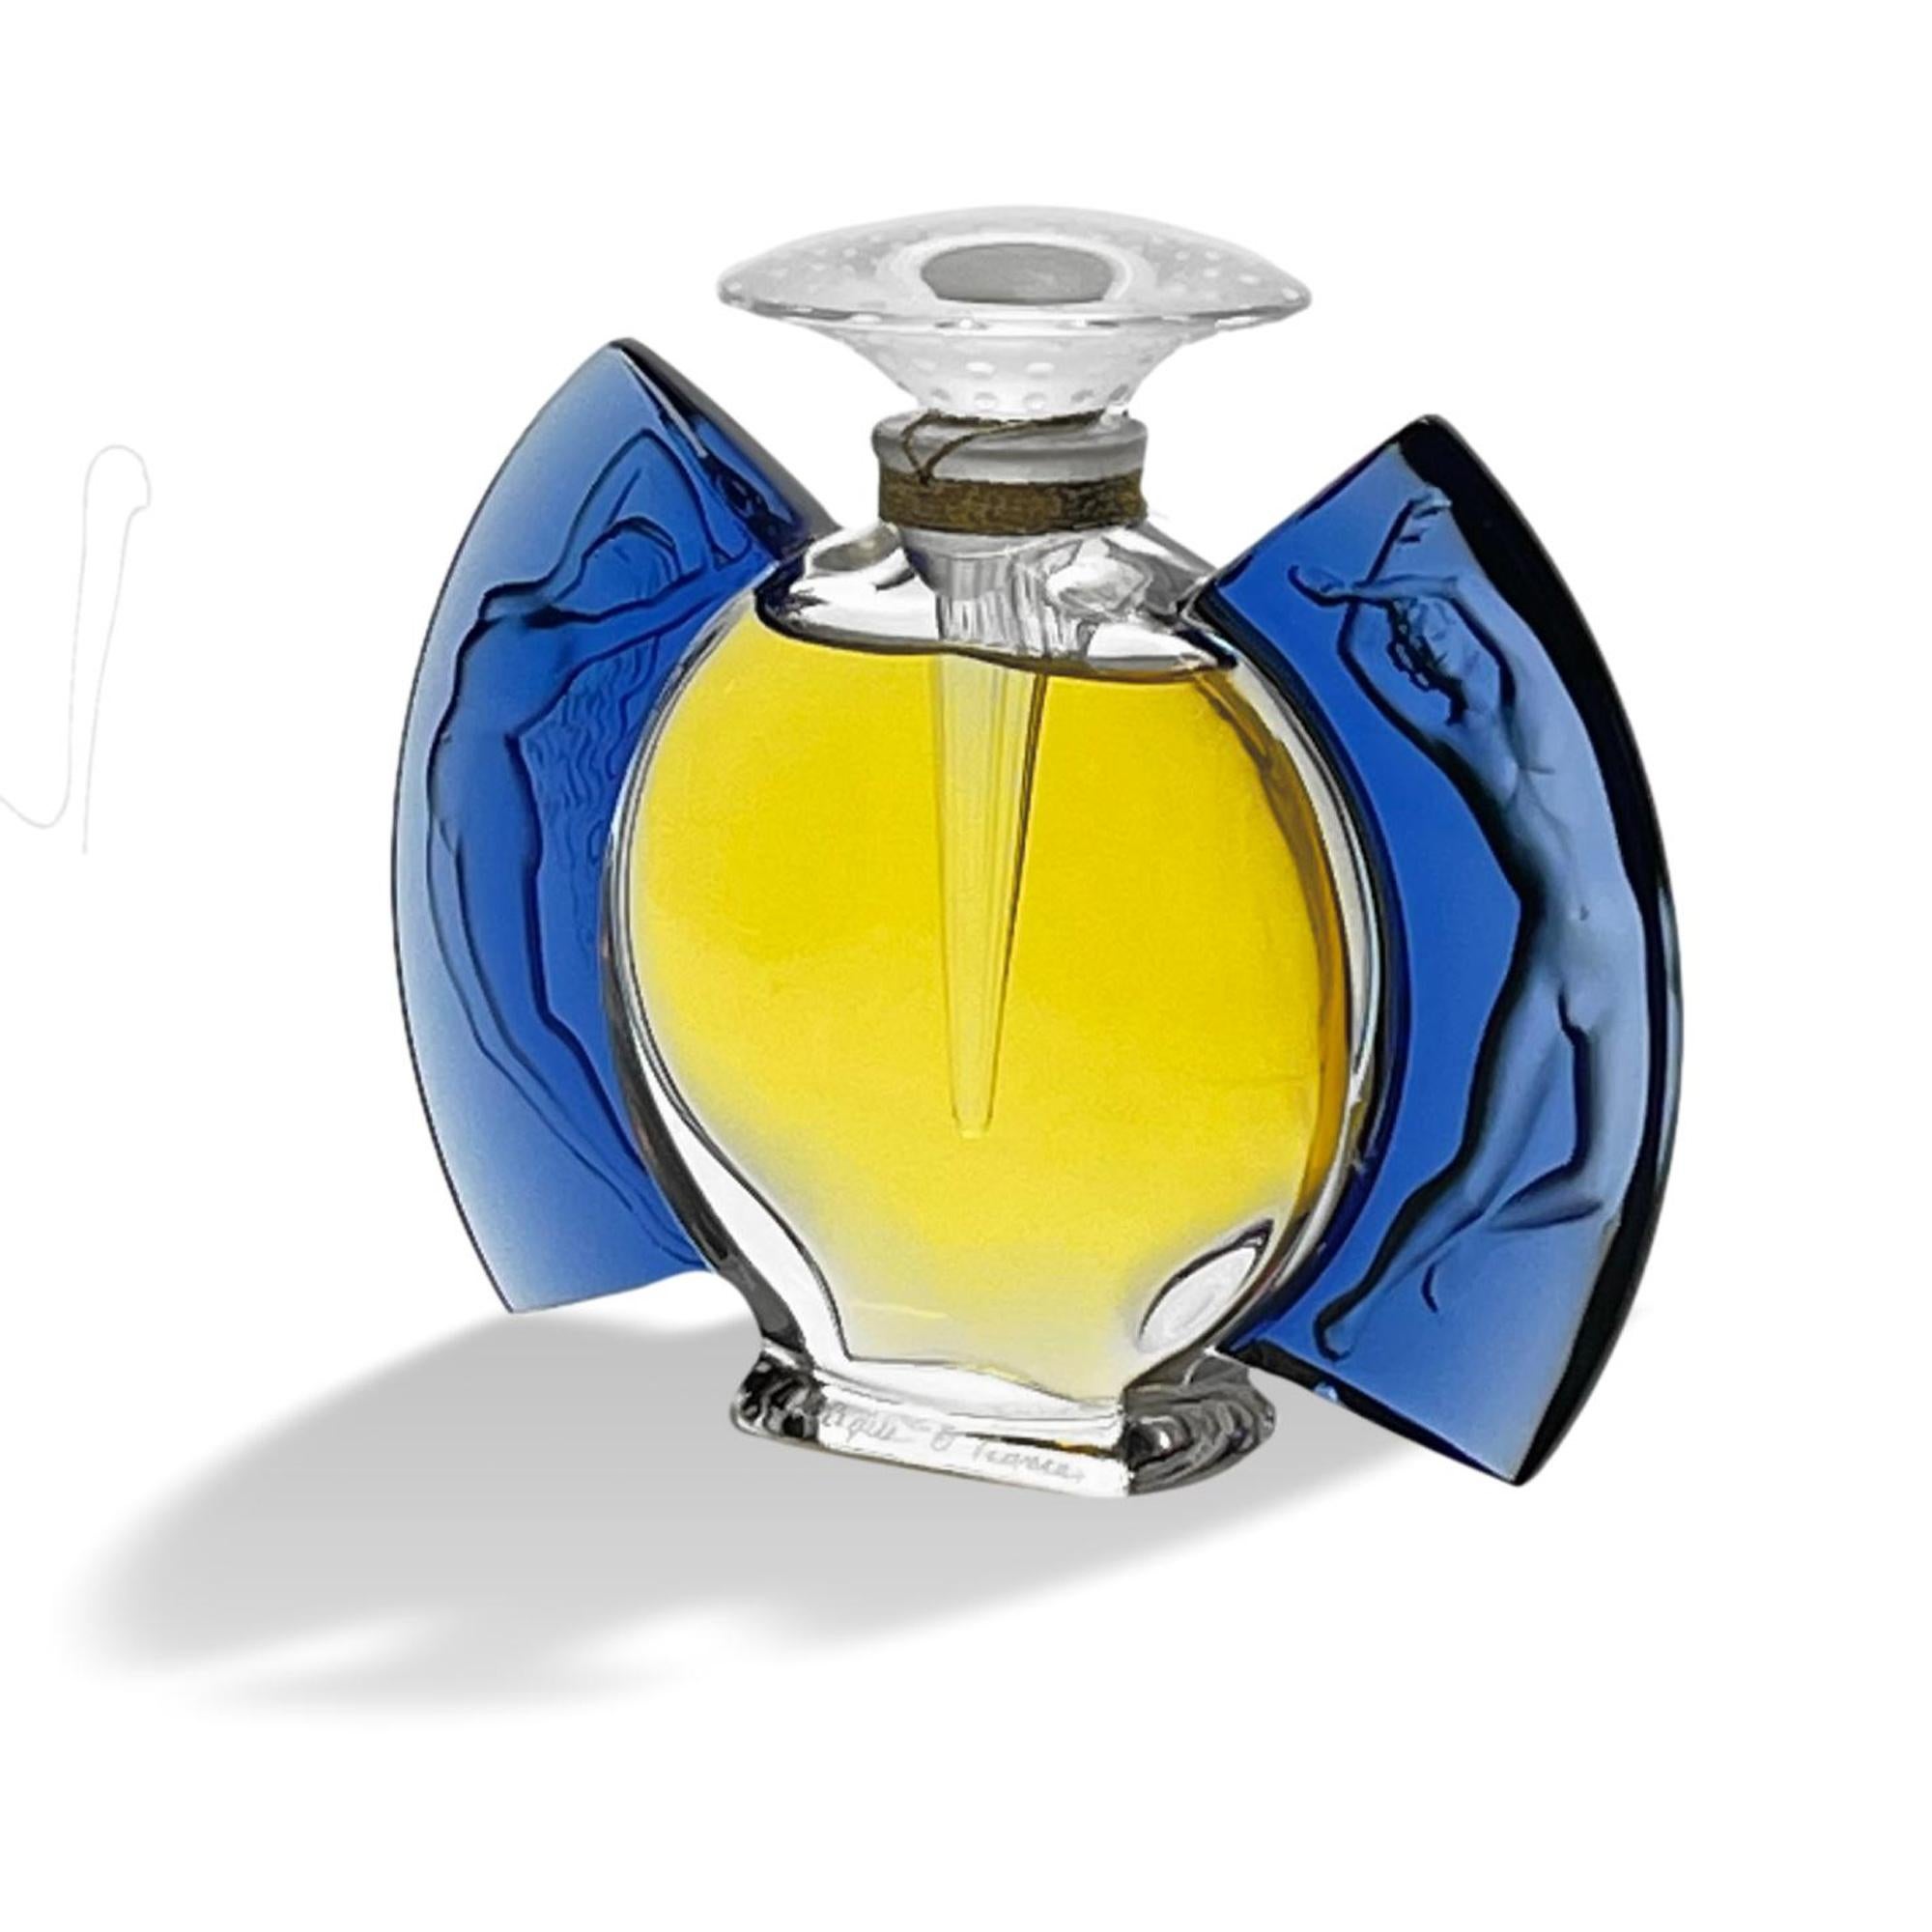 lalique limited edition perfume bottles